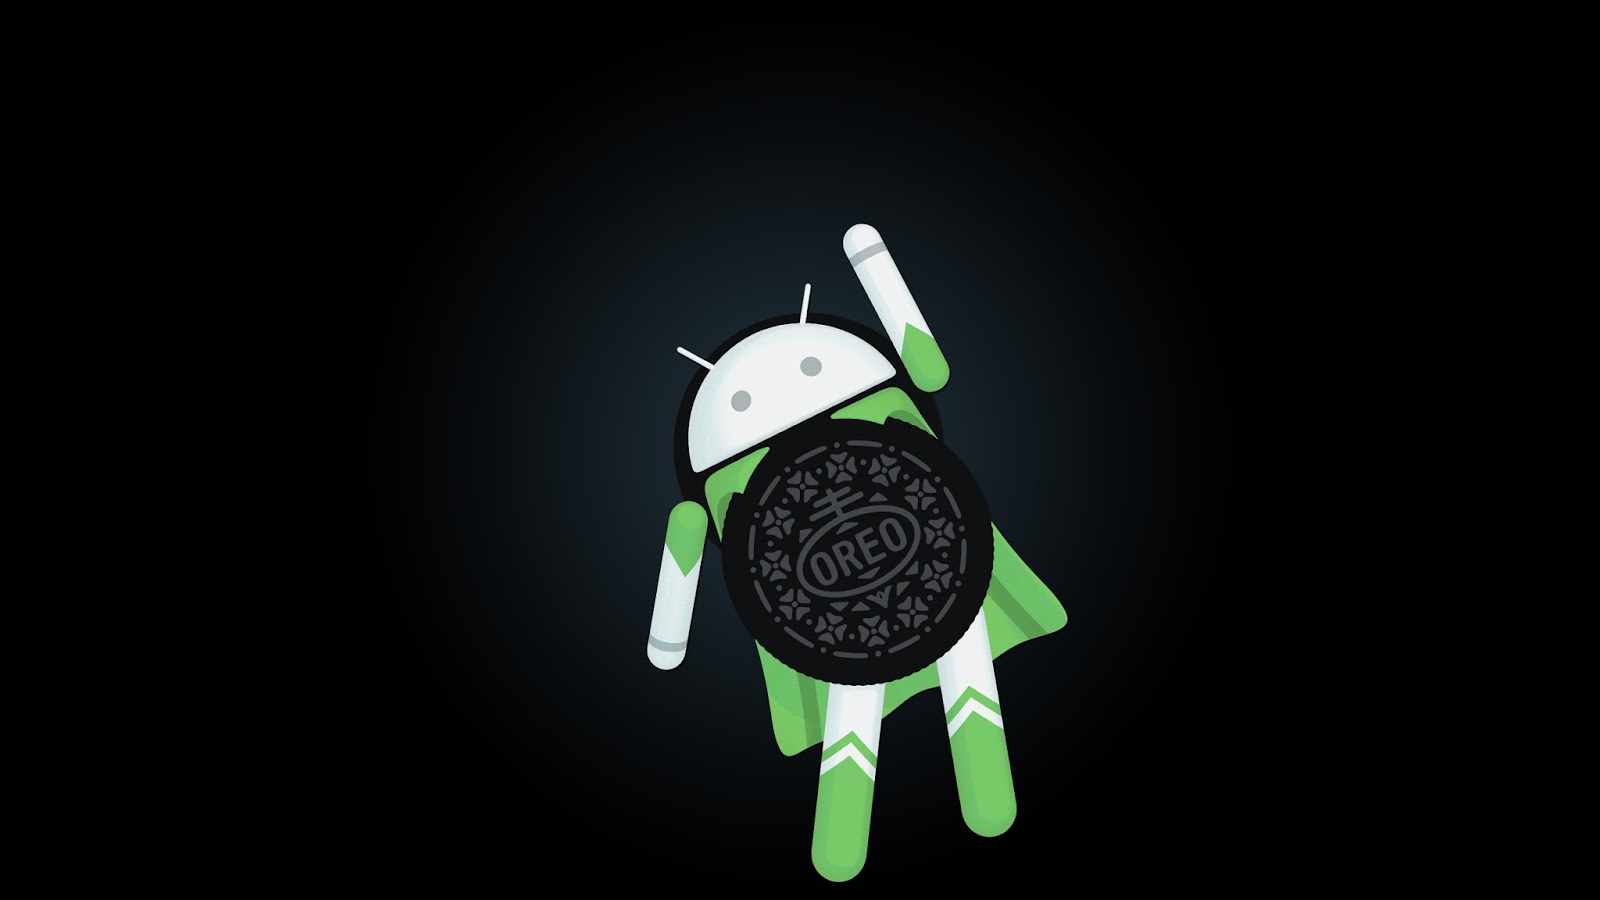 World Of Technology Android Oreo Stock Wallpapers